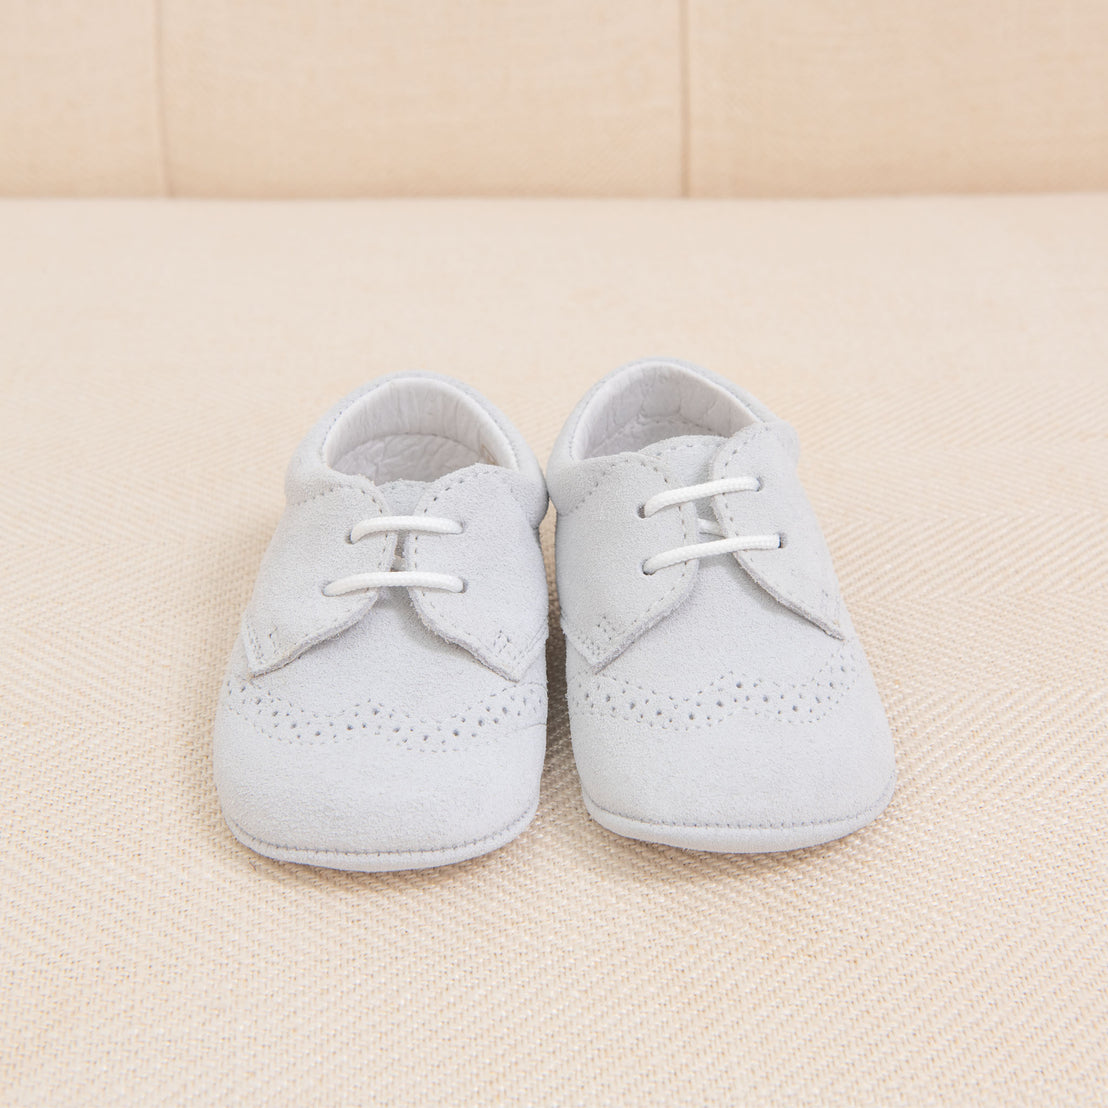 A pair of light gray Baby Beau & Belle Boys Suede Shoes with laces, set on a beige fabric background.